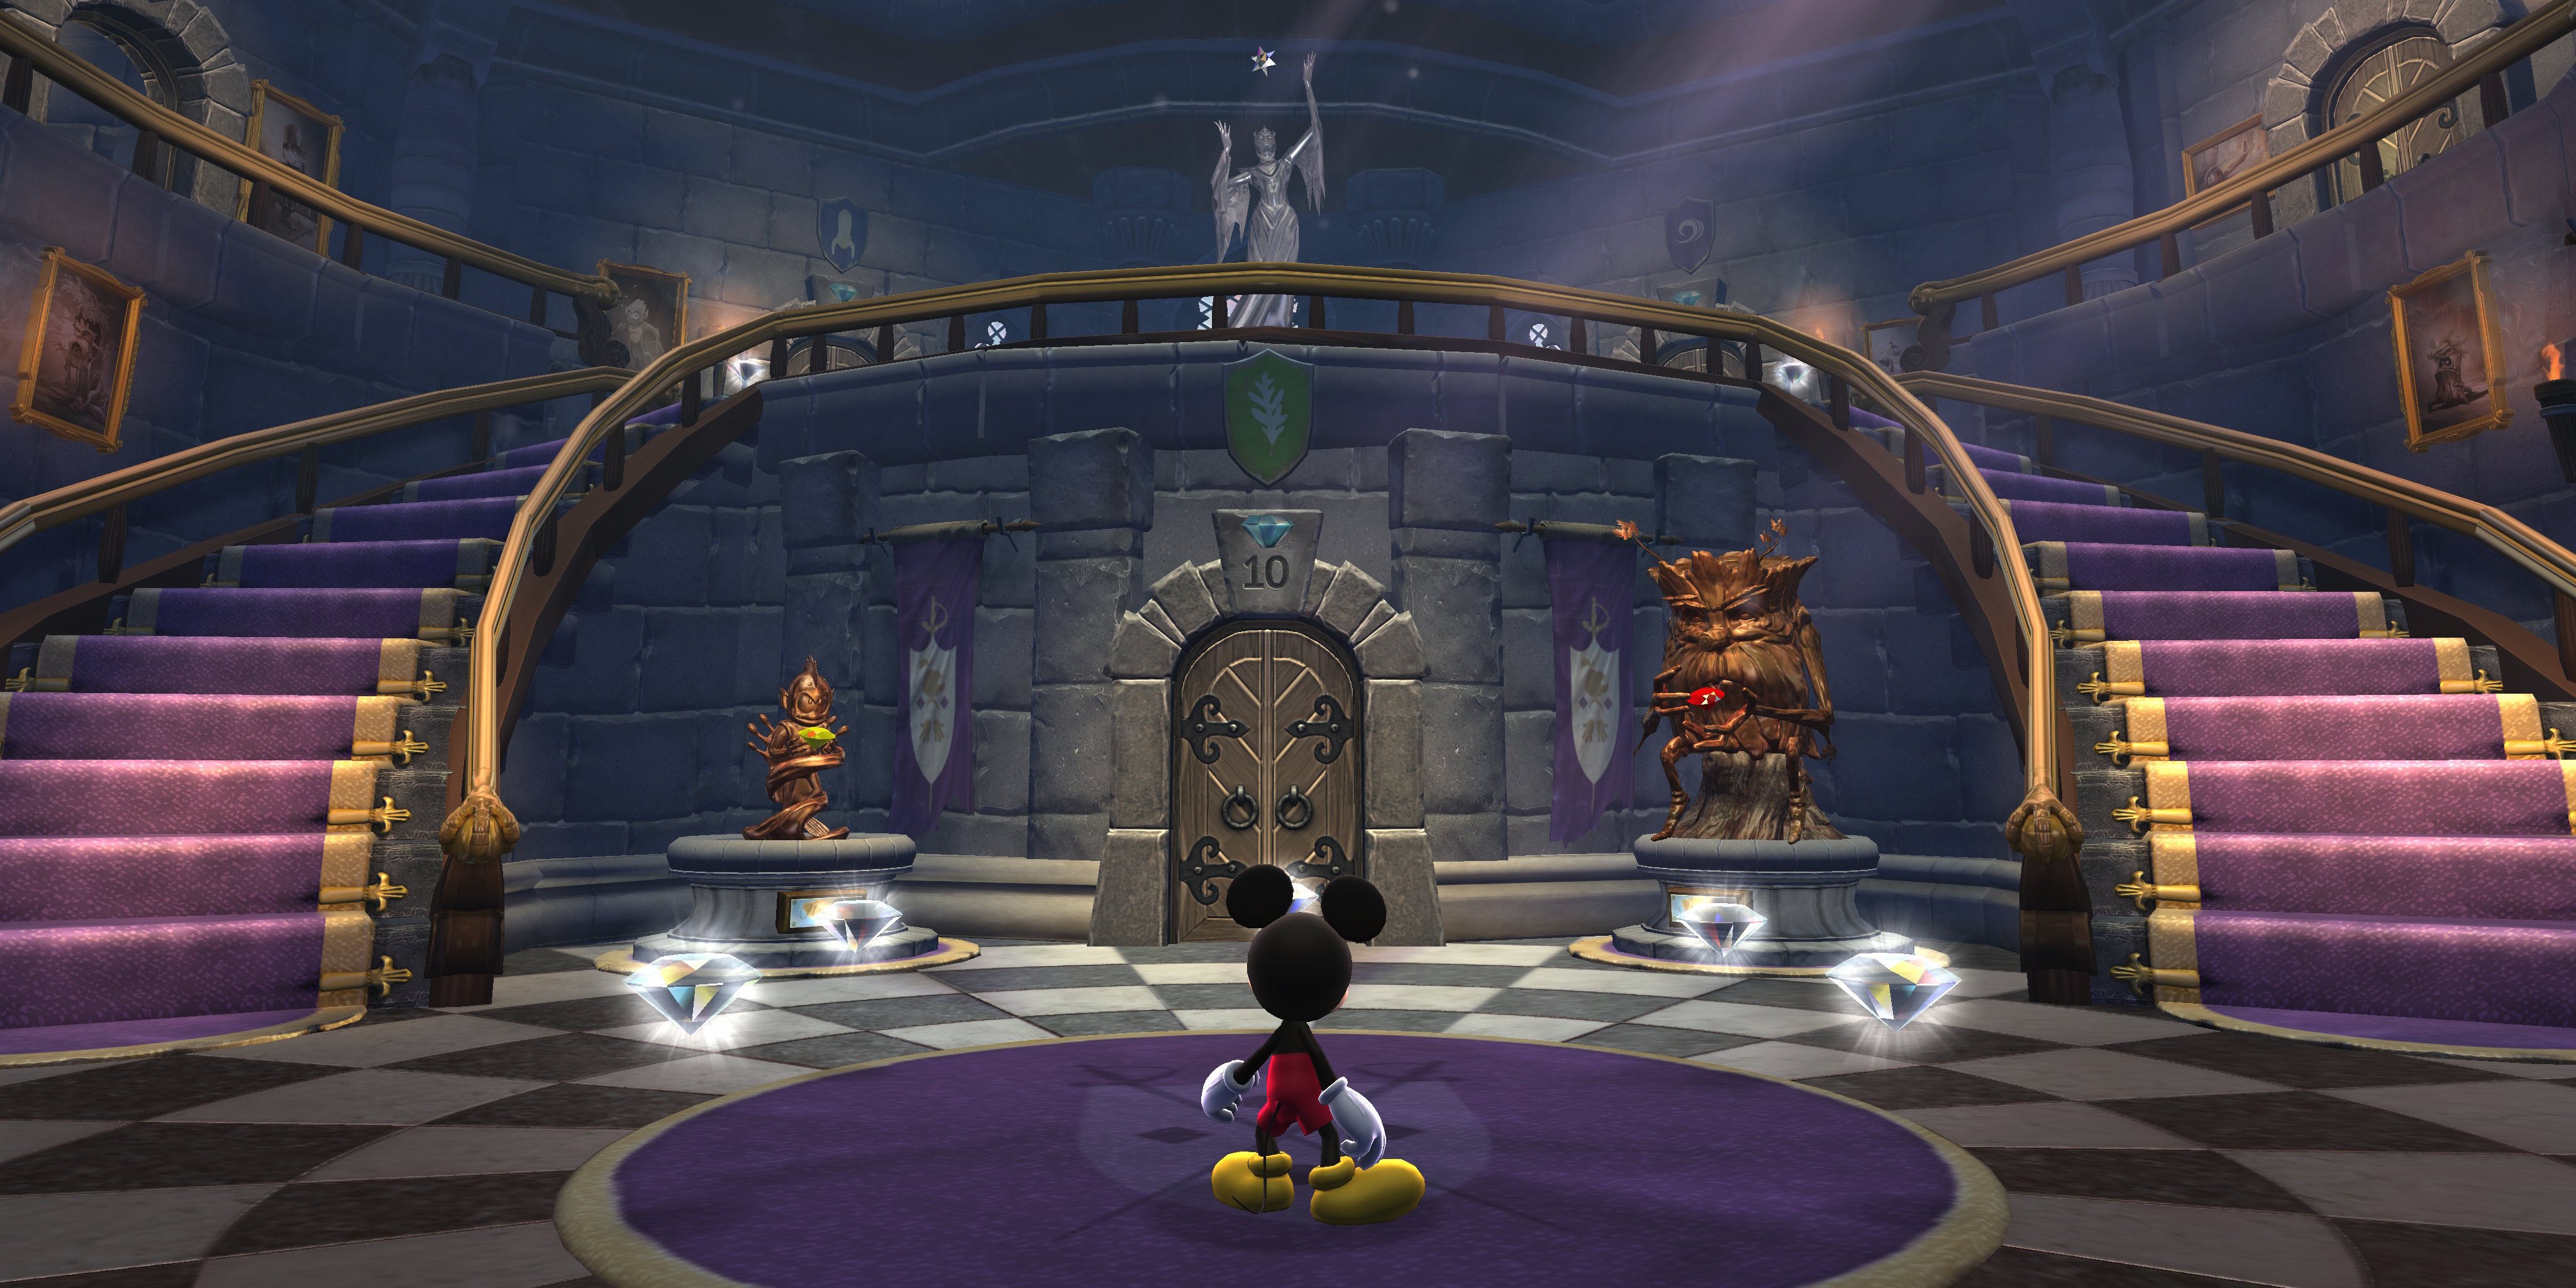 castle of illusion starring mickey mouse 1990